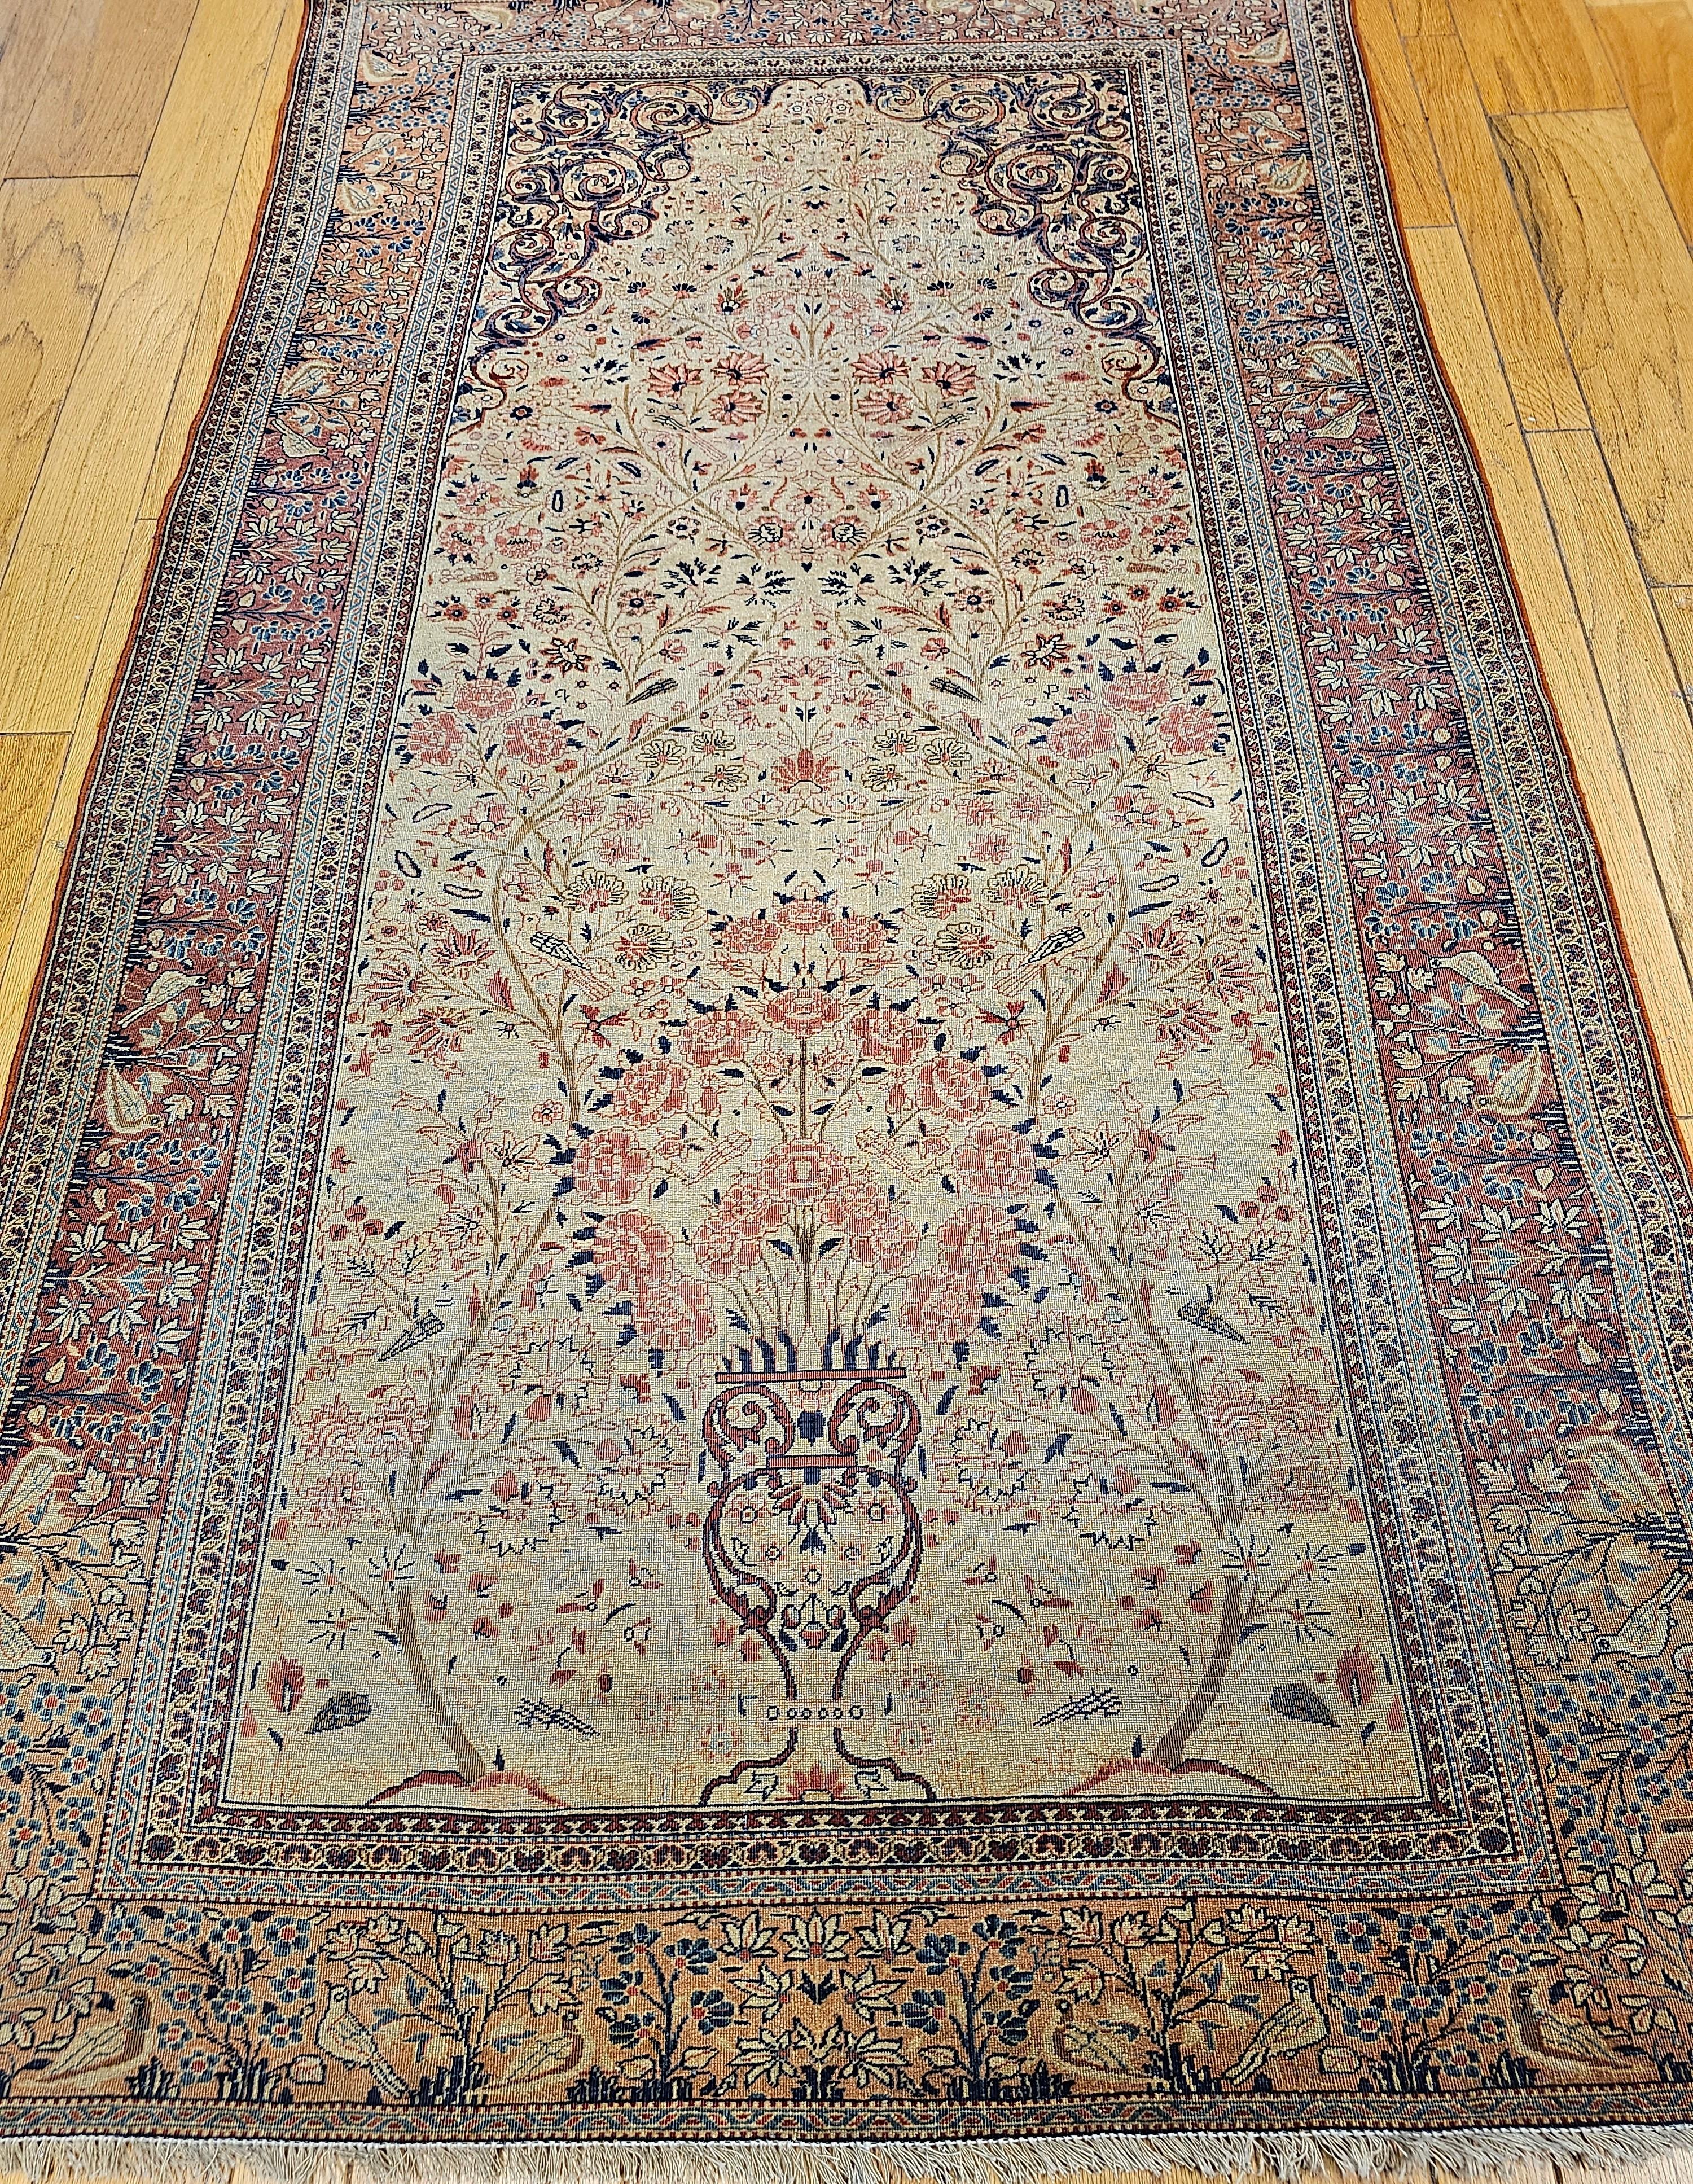 19th Century Persian Kashan “Tree of Life” Vase Rug in Ivory, Brick Red, Navy For Sale 14